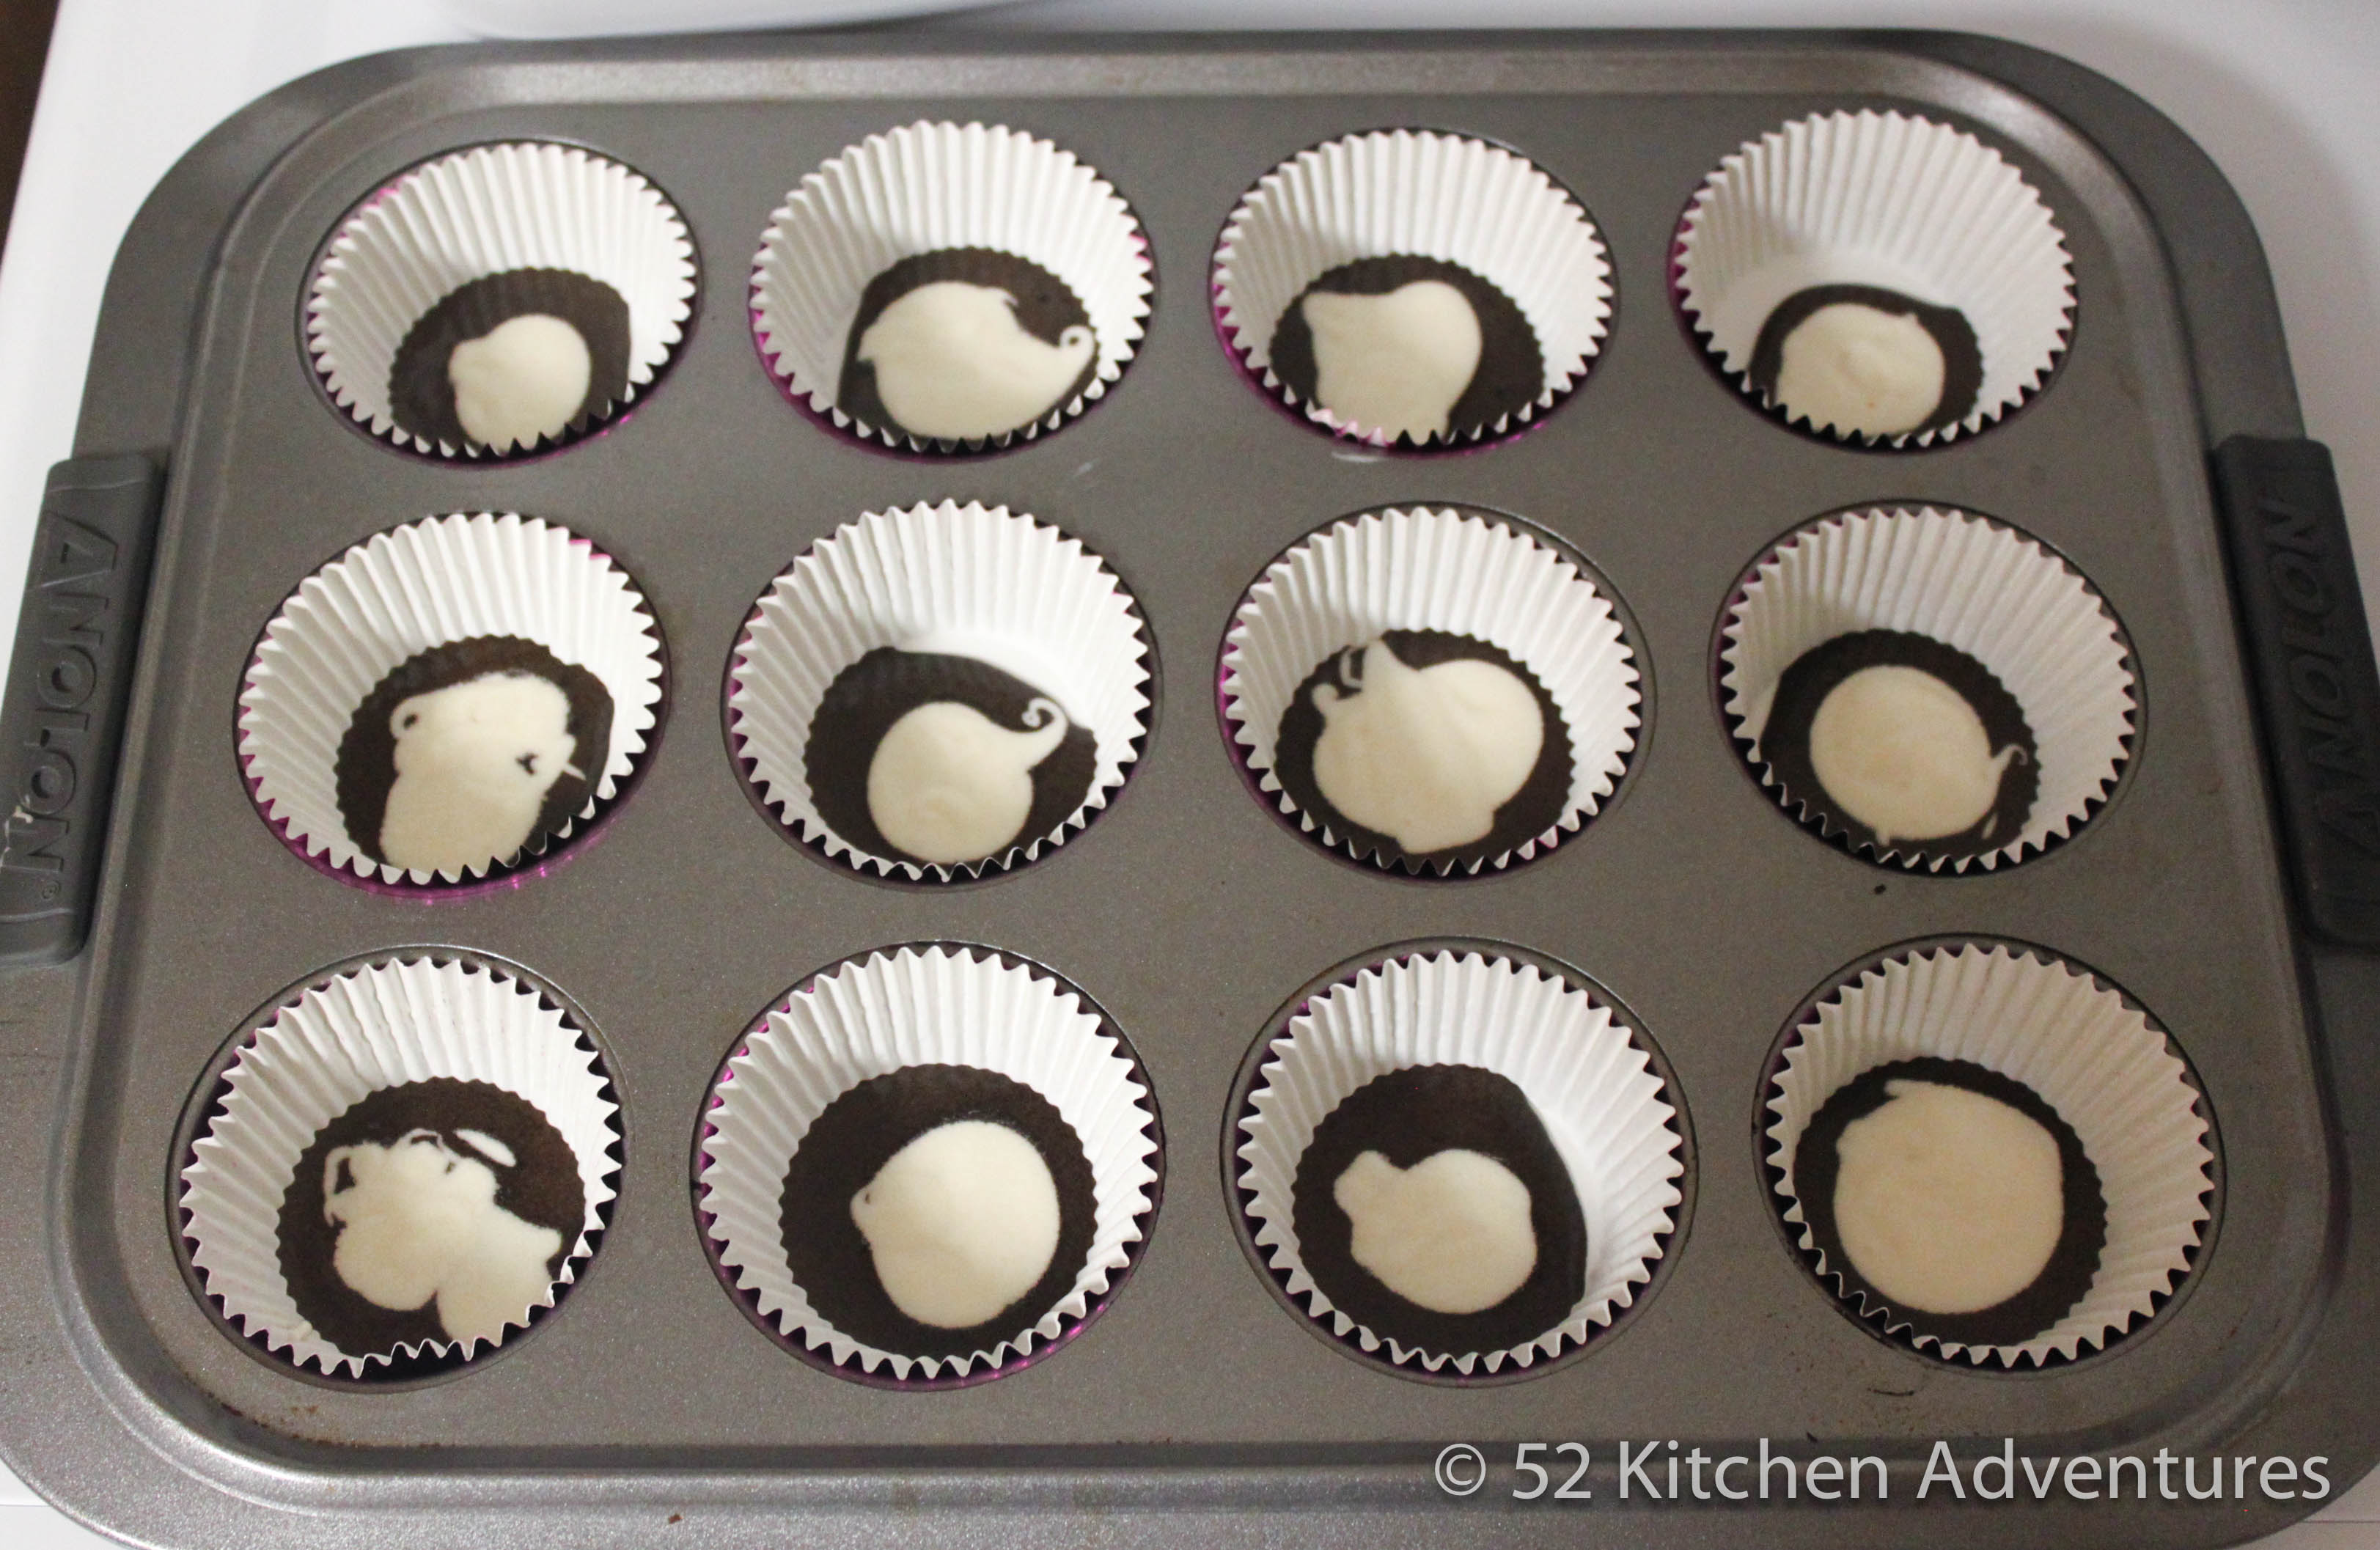 Pour 1 teaspoon of vanilla cake batter into cupcake liners